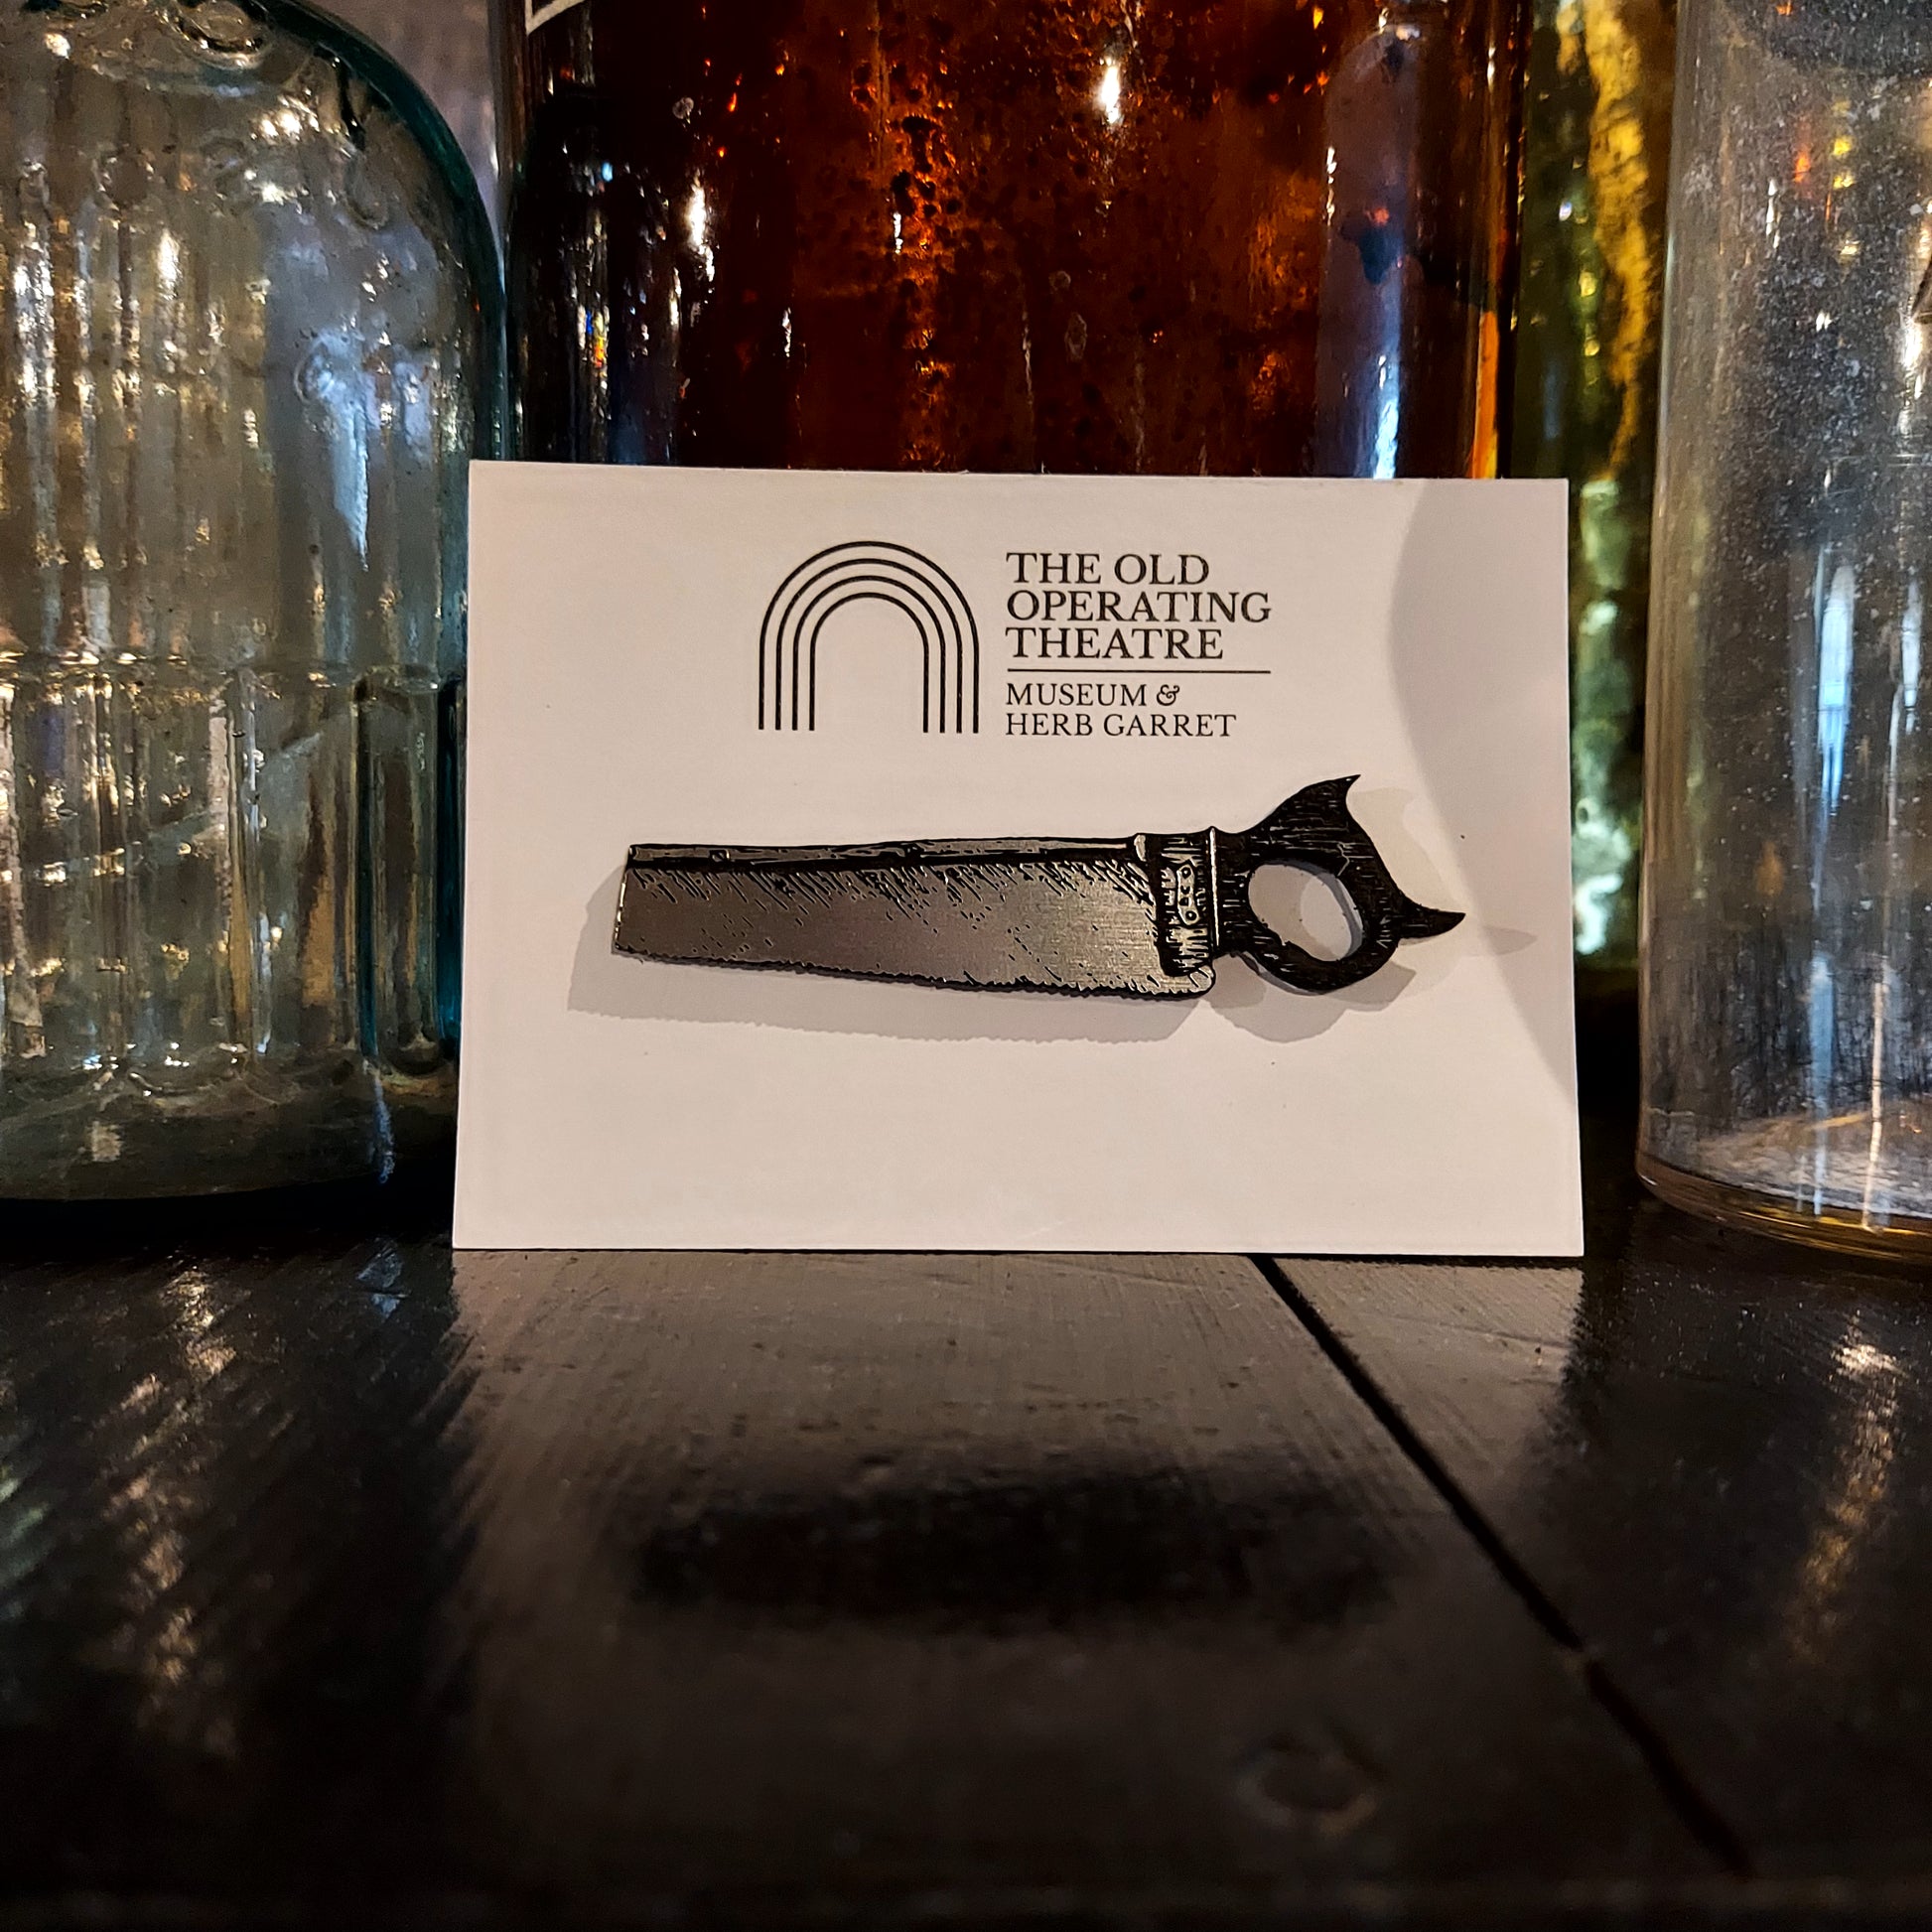 A silver-coloured brooch in the shape of a saw on a piece of white card with the museum's logo, placed against a selection of glass bottles in the museum